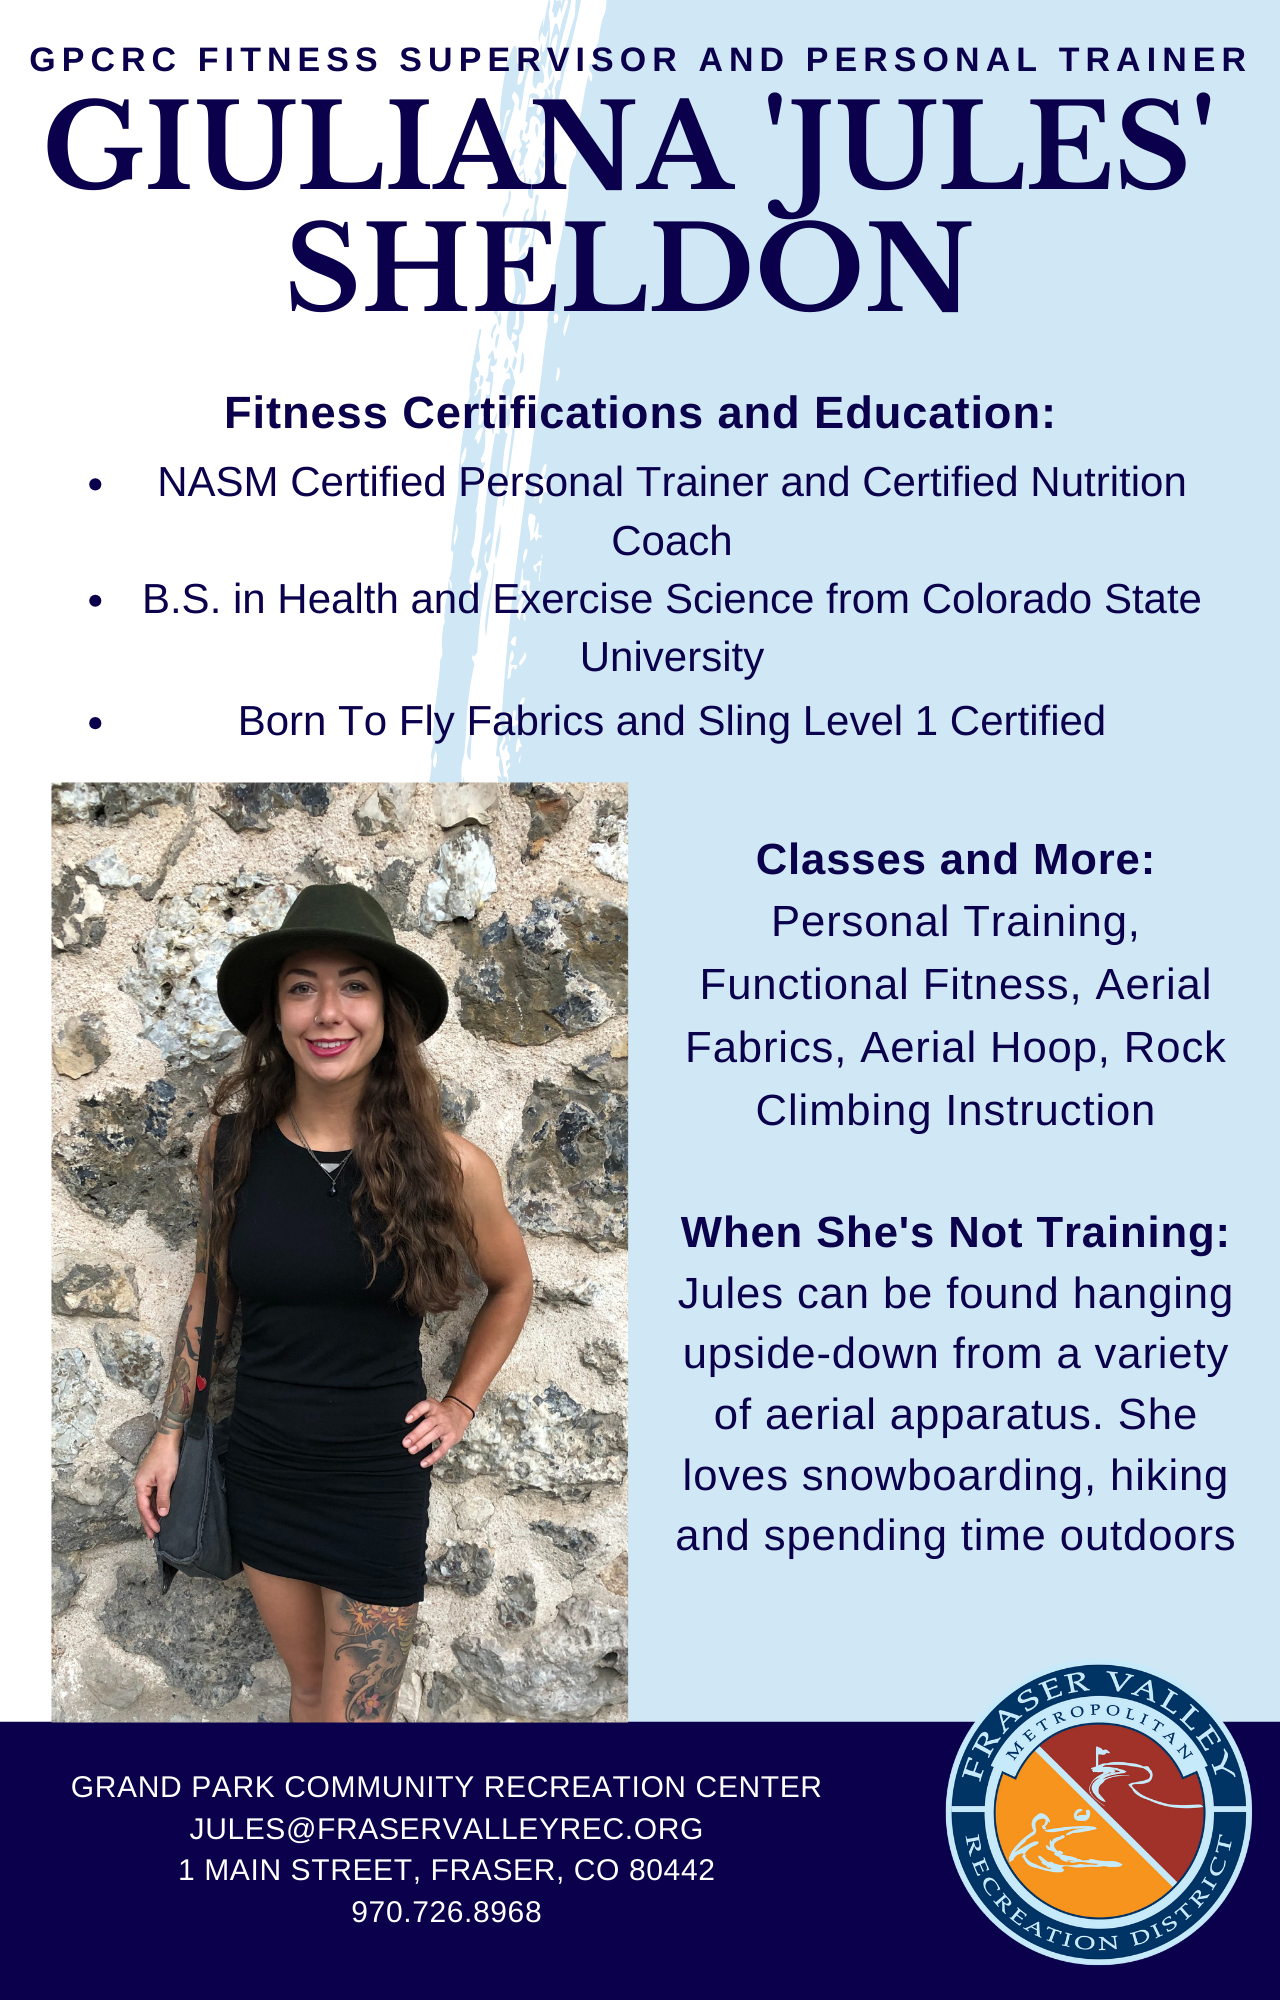 Advertisement for GPCRC fitness supervisor and personal trainer Giuliana Jules Sheldon